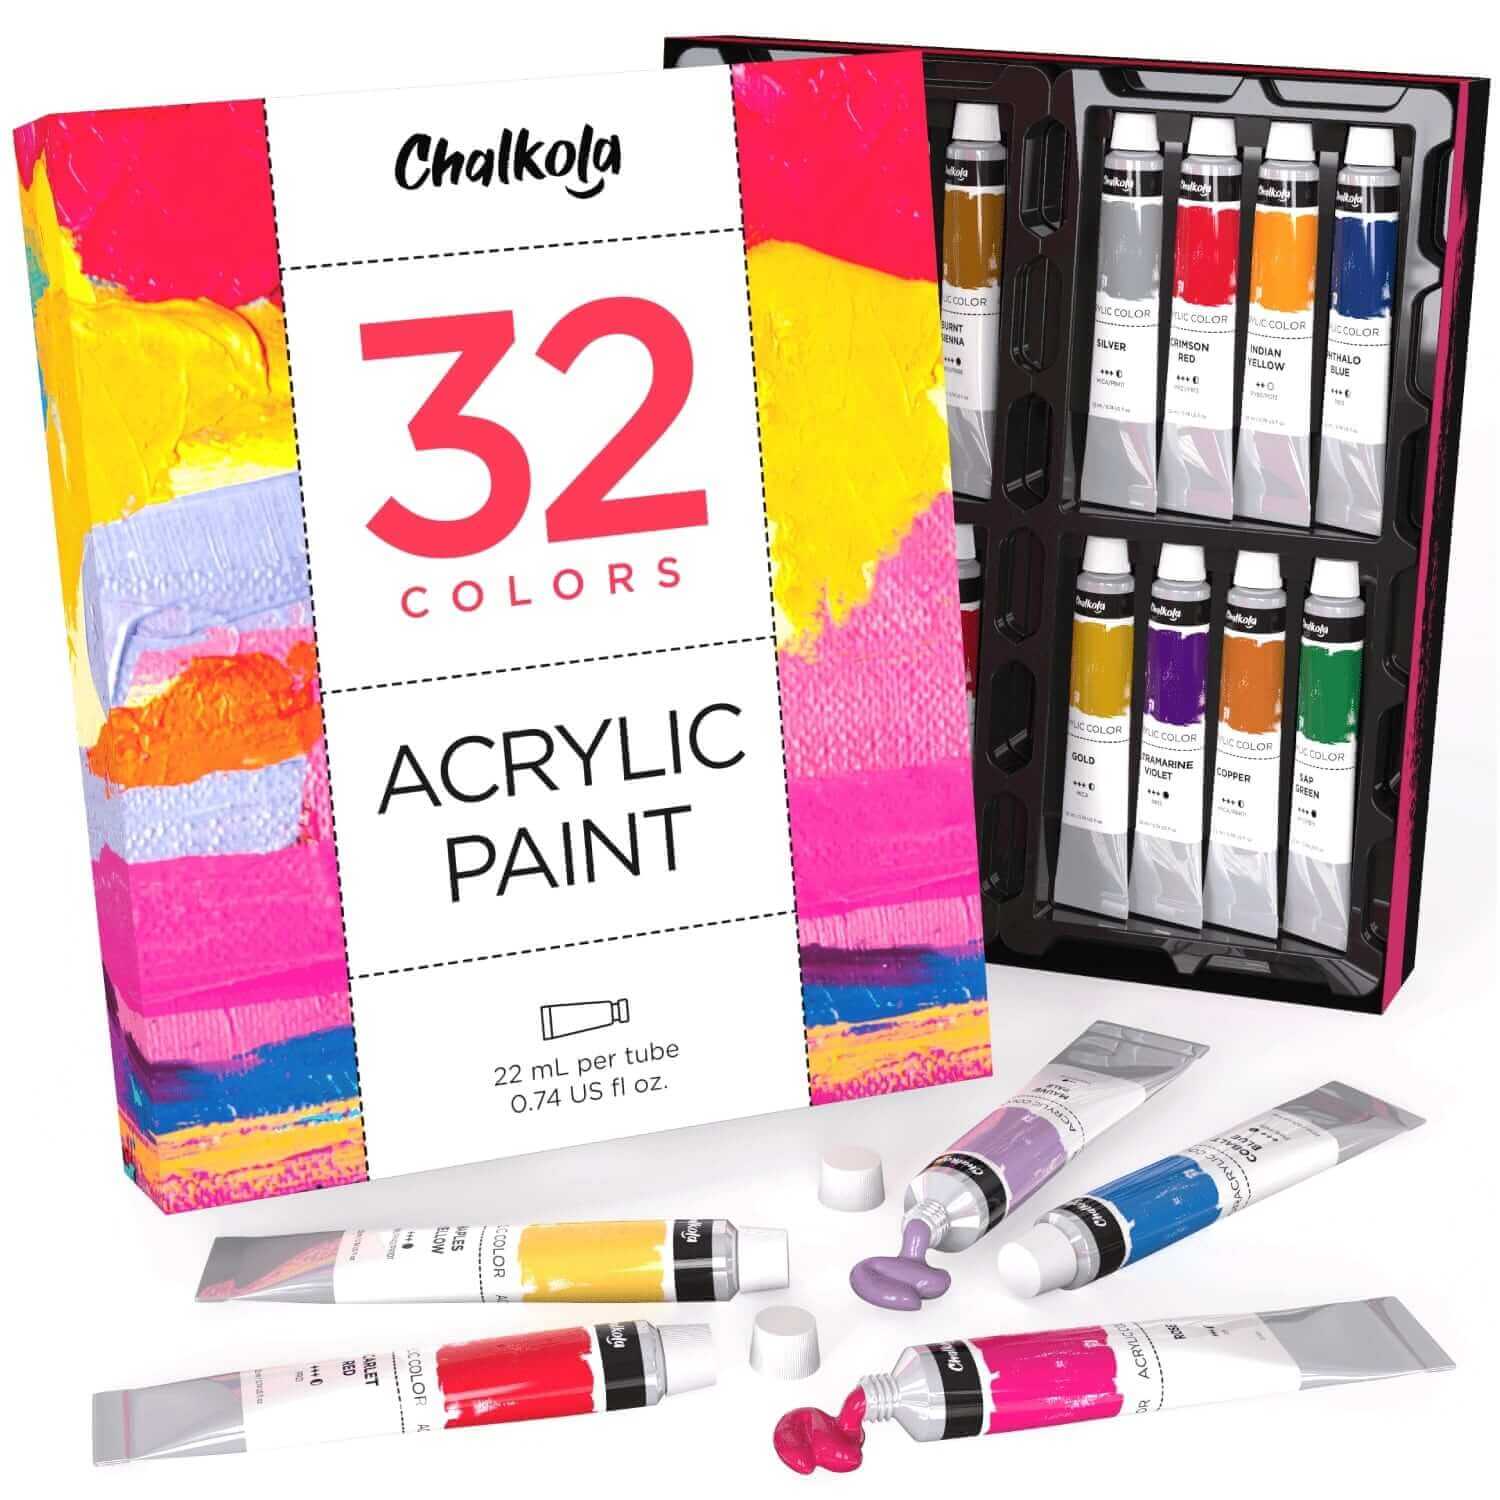 Acrylic Painting Kit set includes multiple accessories for beginners and  children